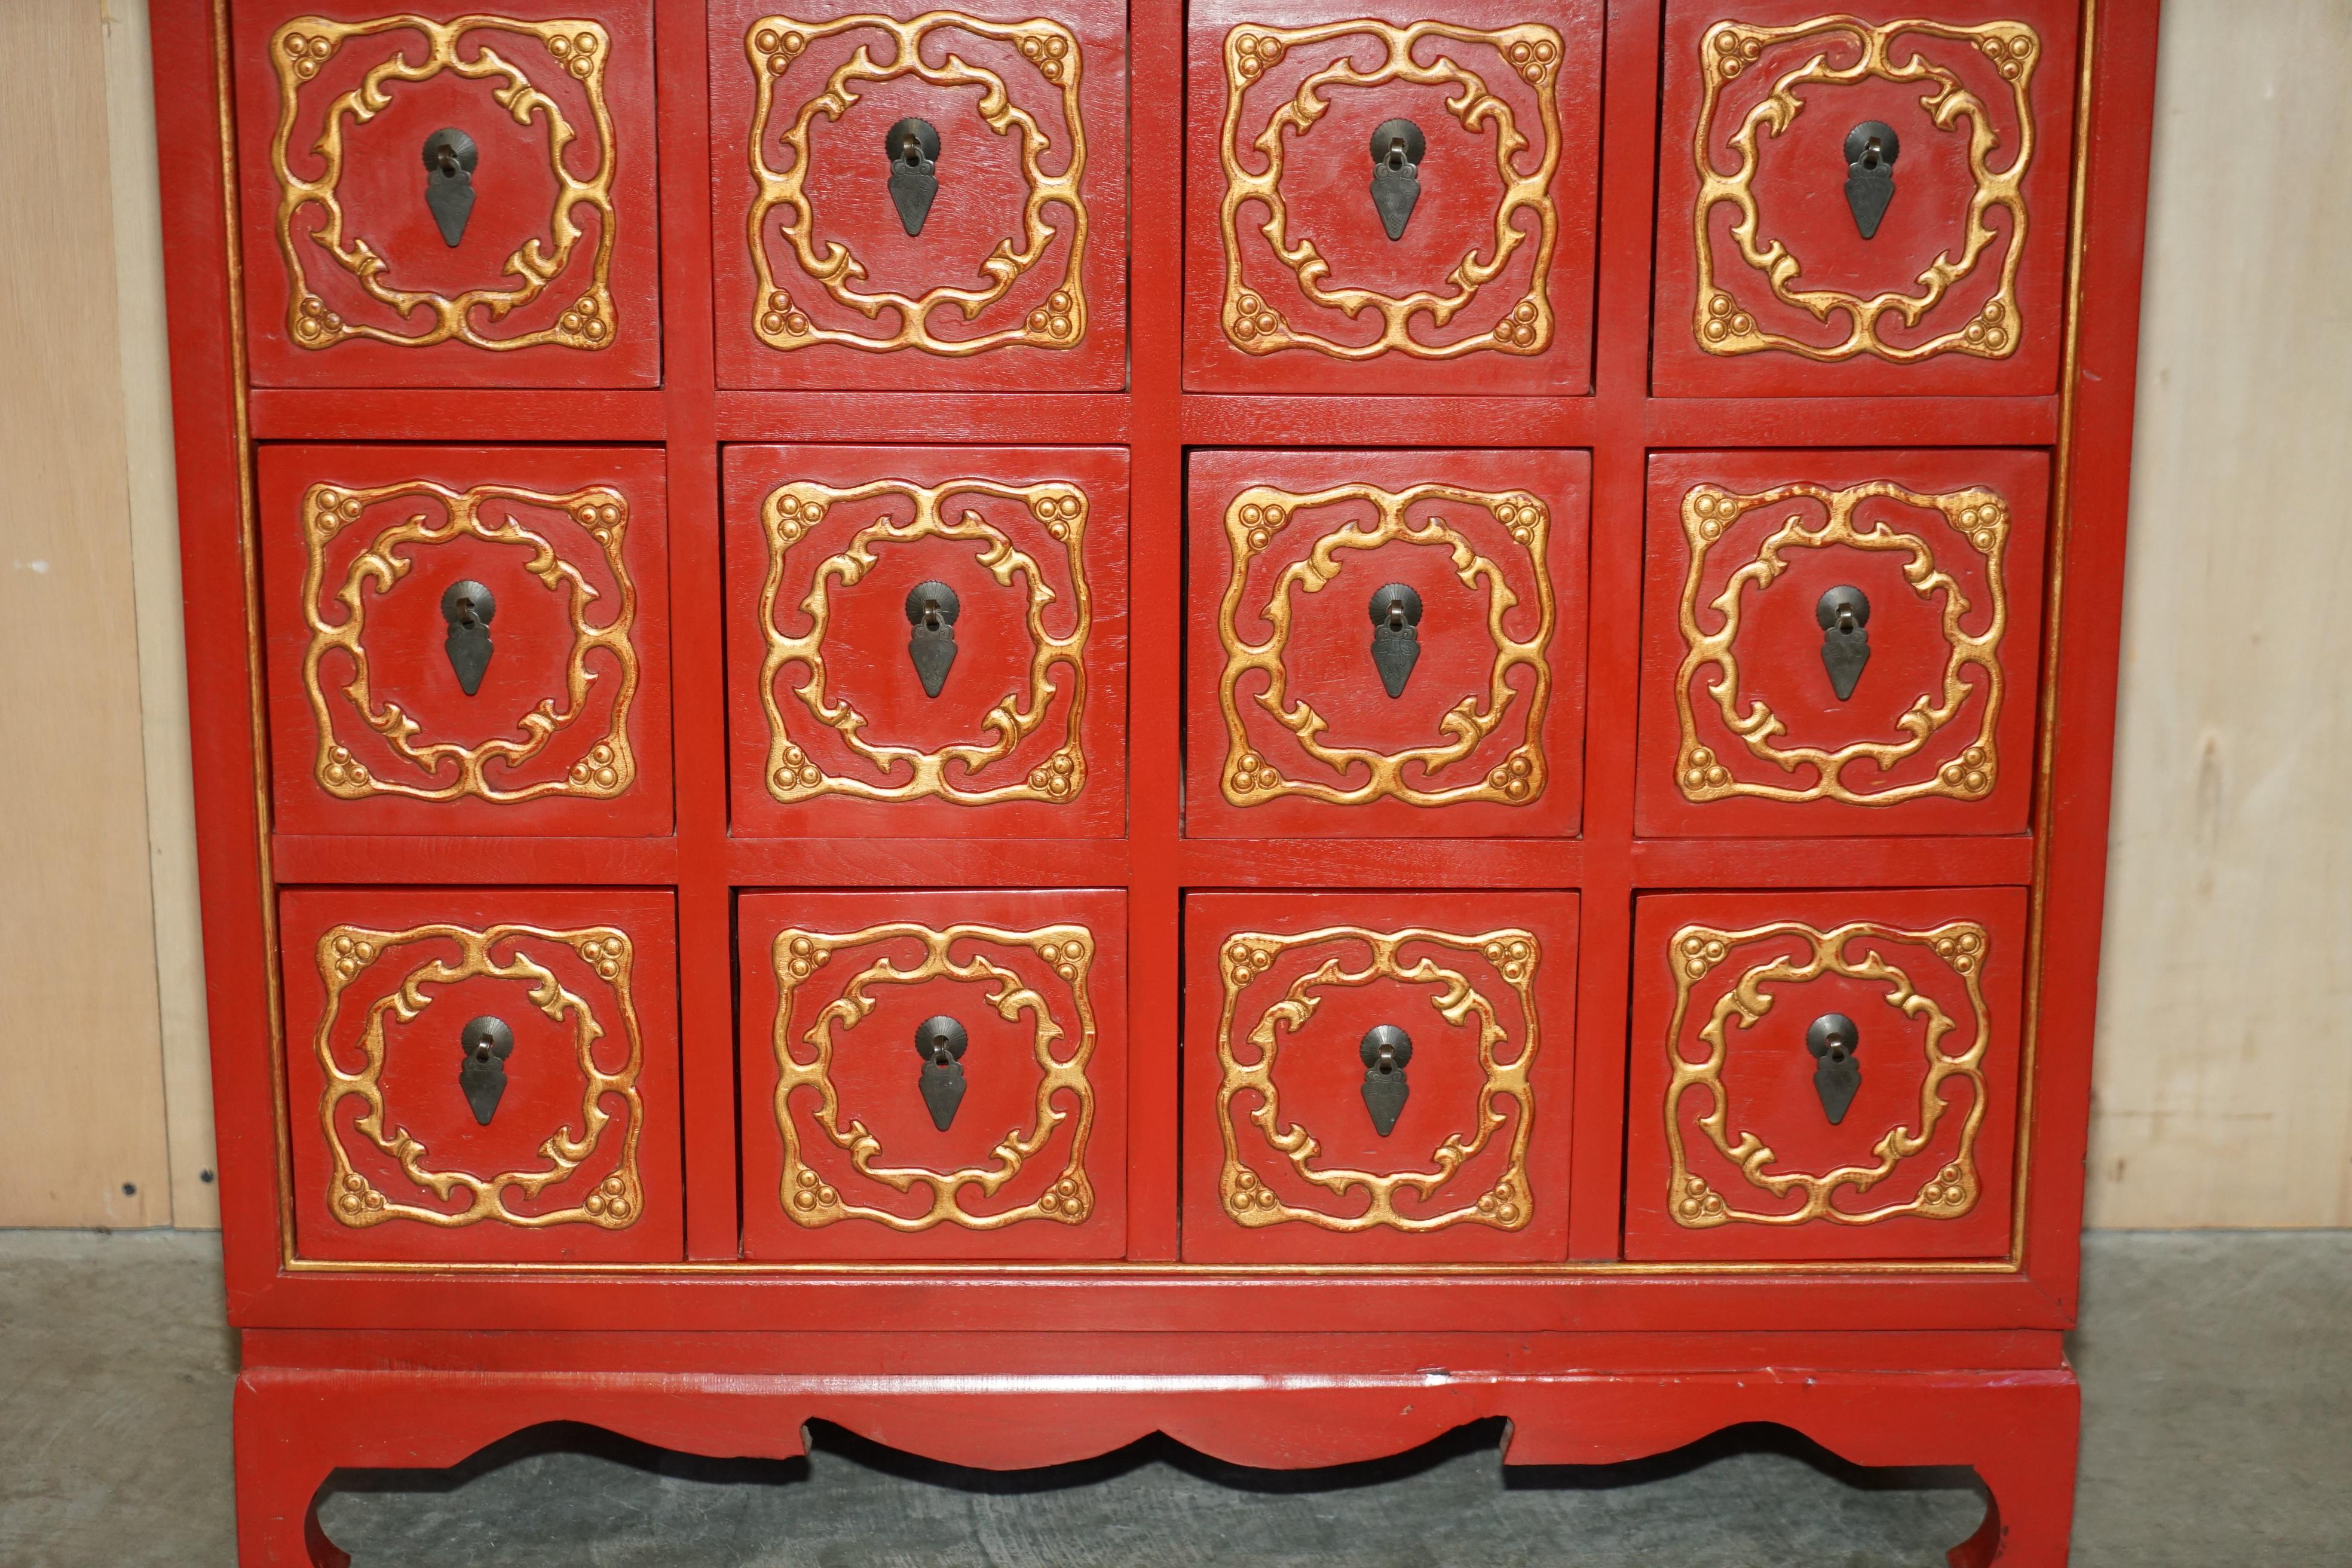 Rare Oriental Chinese Export Vintage Cabinet Lots of Drawers for Fine Teas For Sale 3